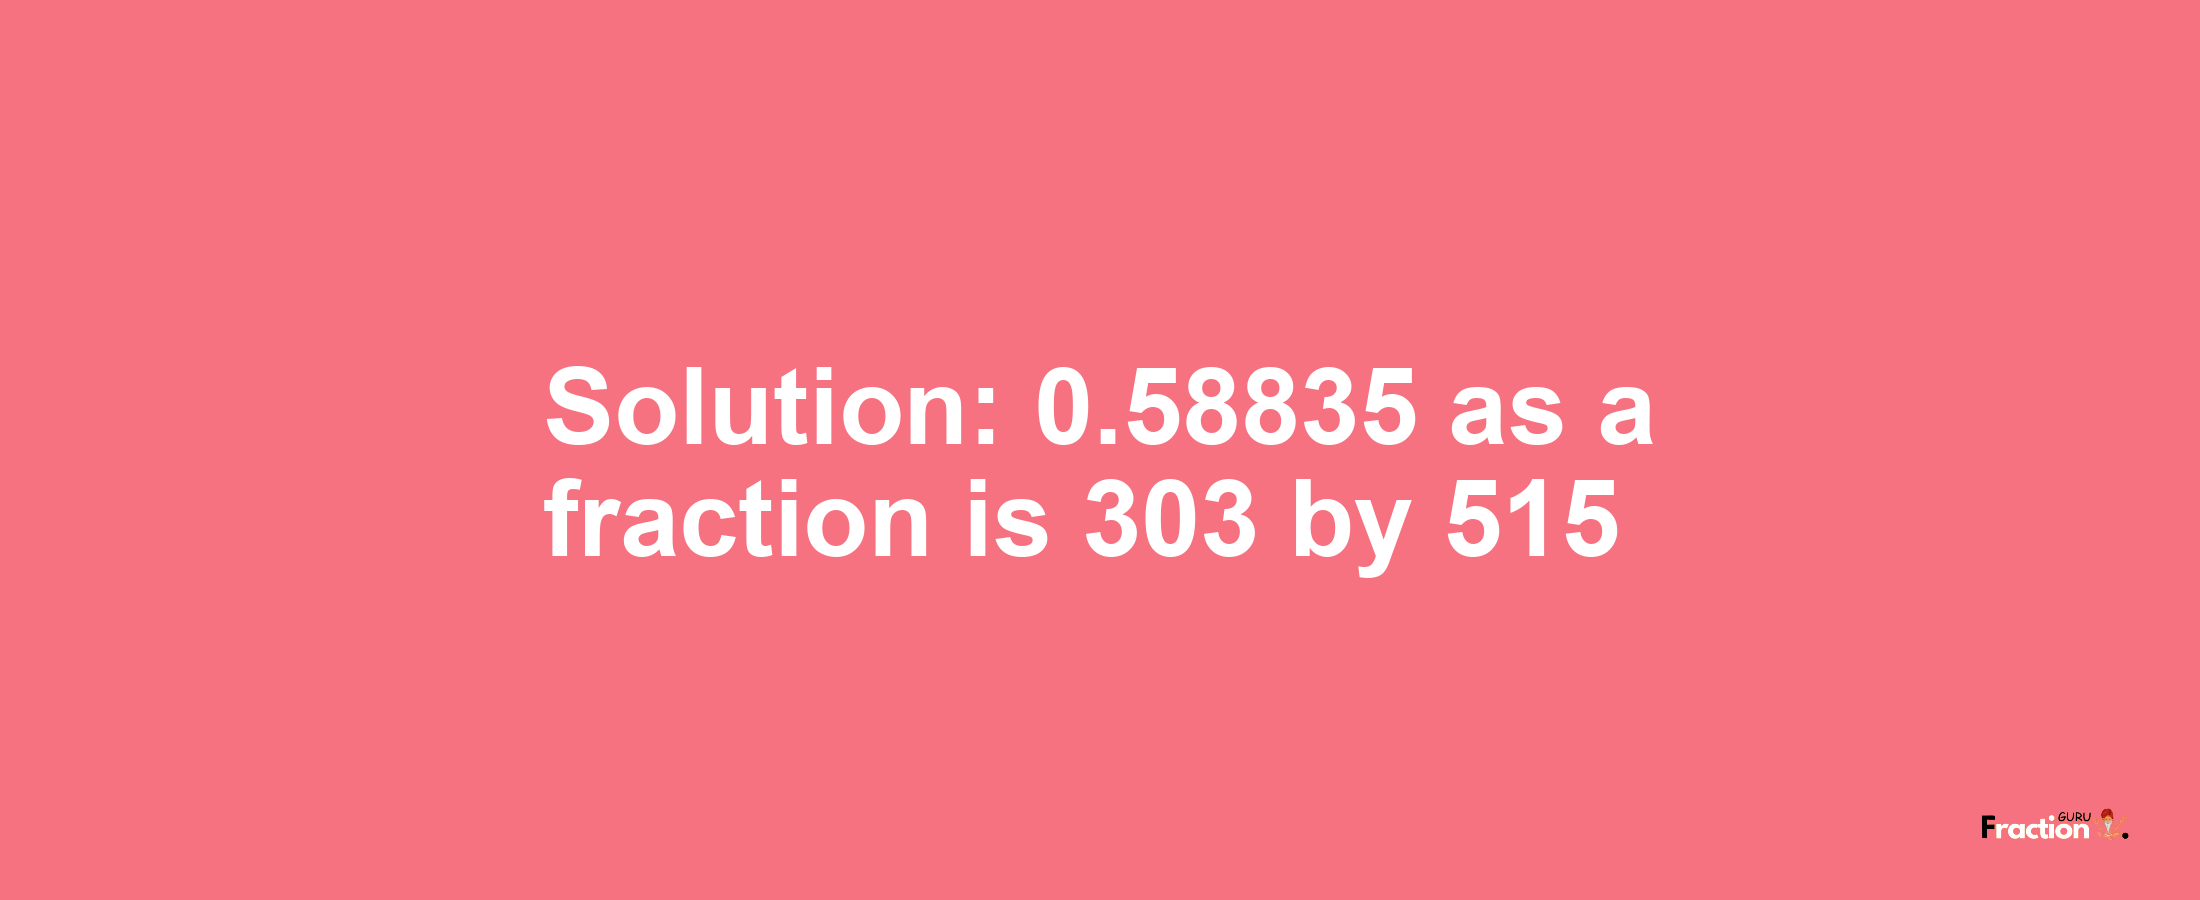 Solution:0.58835 as a fraction is 303/515